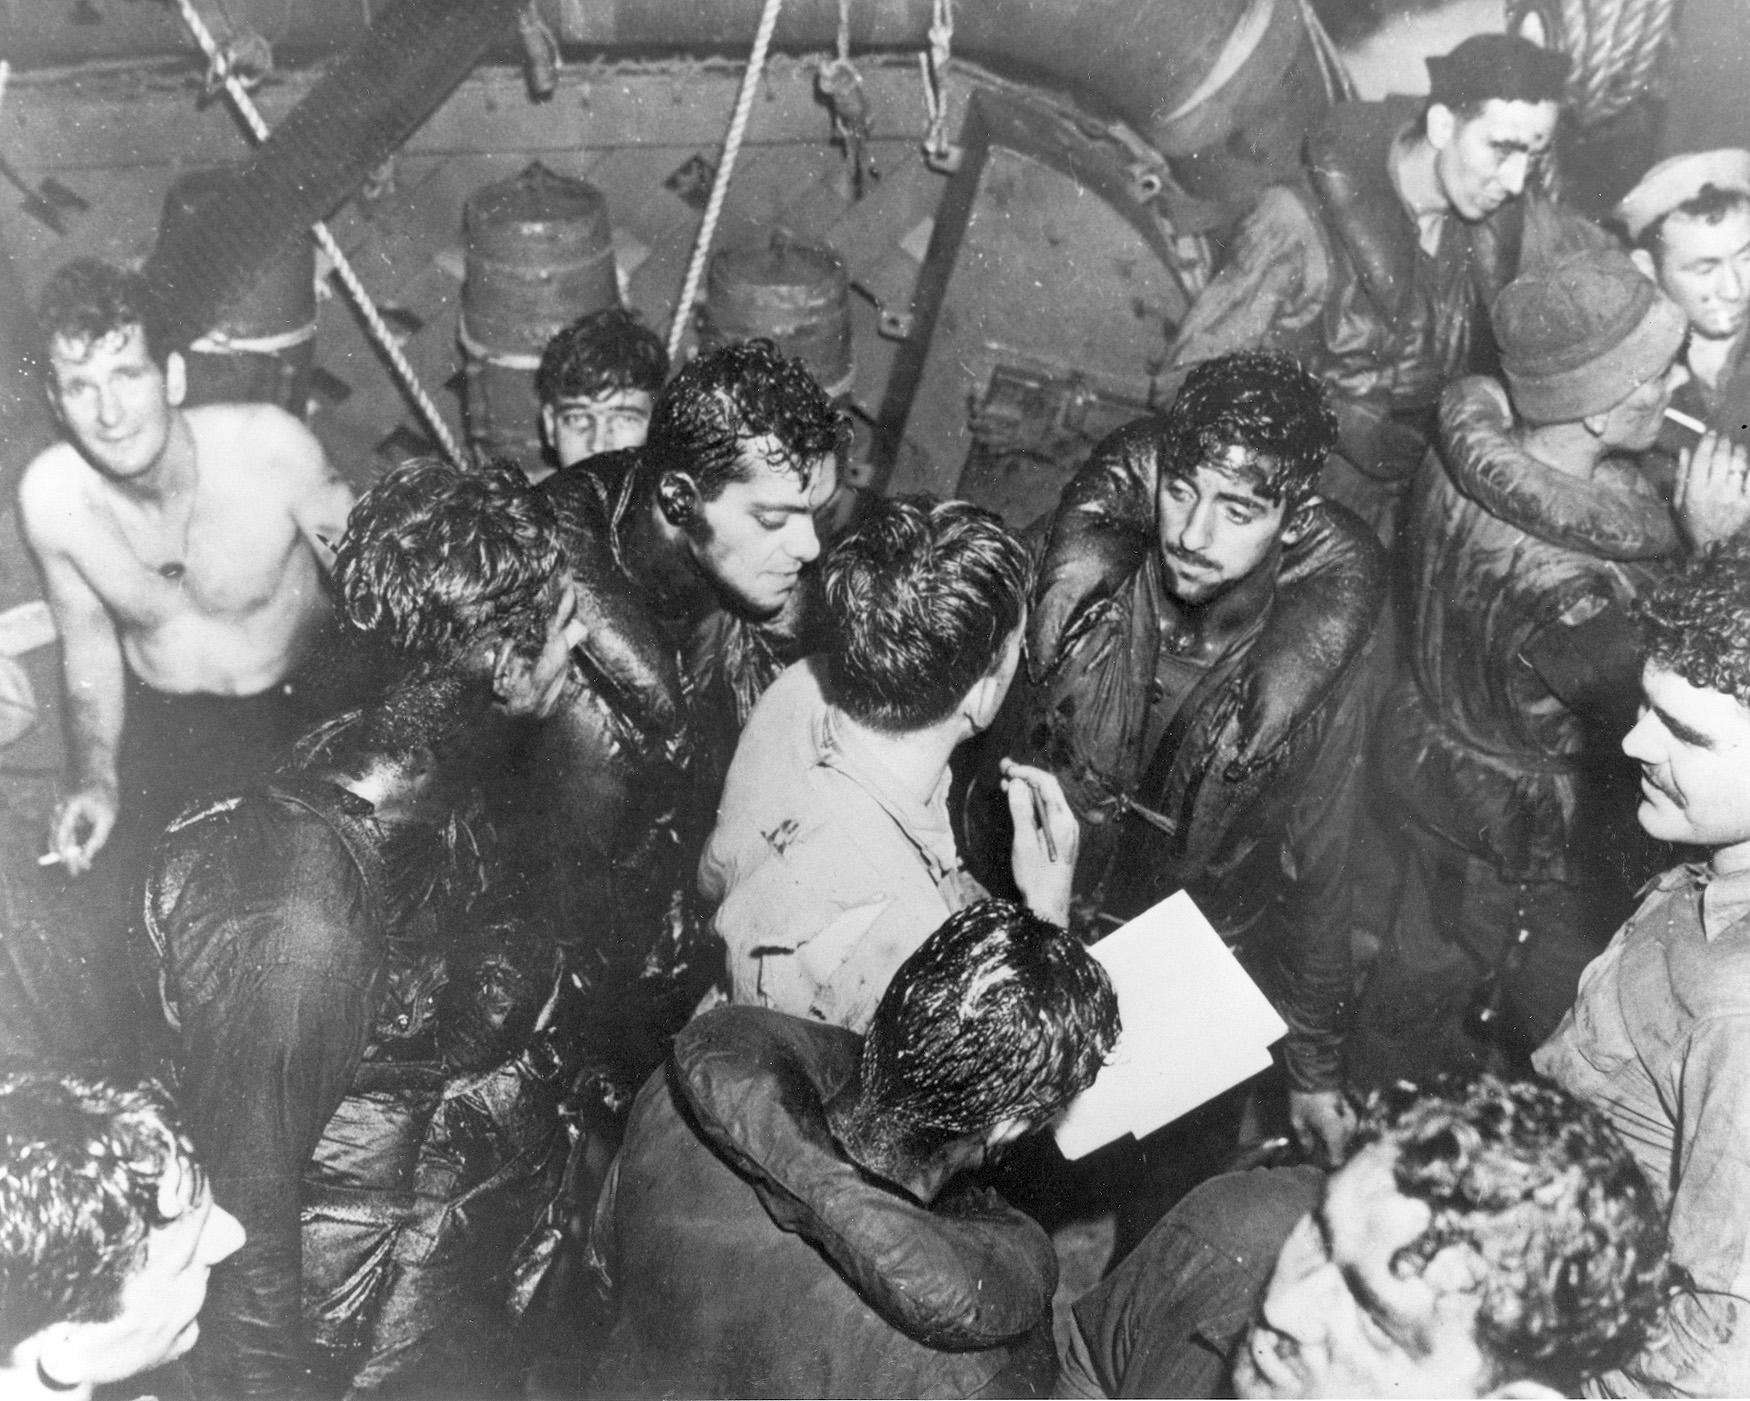 Wet and oiled sailors of the torpedoed cruiser Helena take what comfort they can on the decks of their rescuer, the destroyer Nicholas.